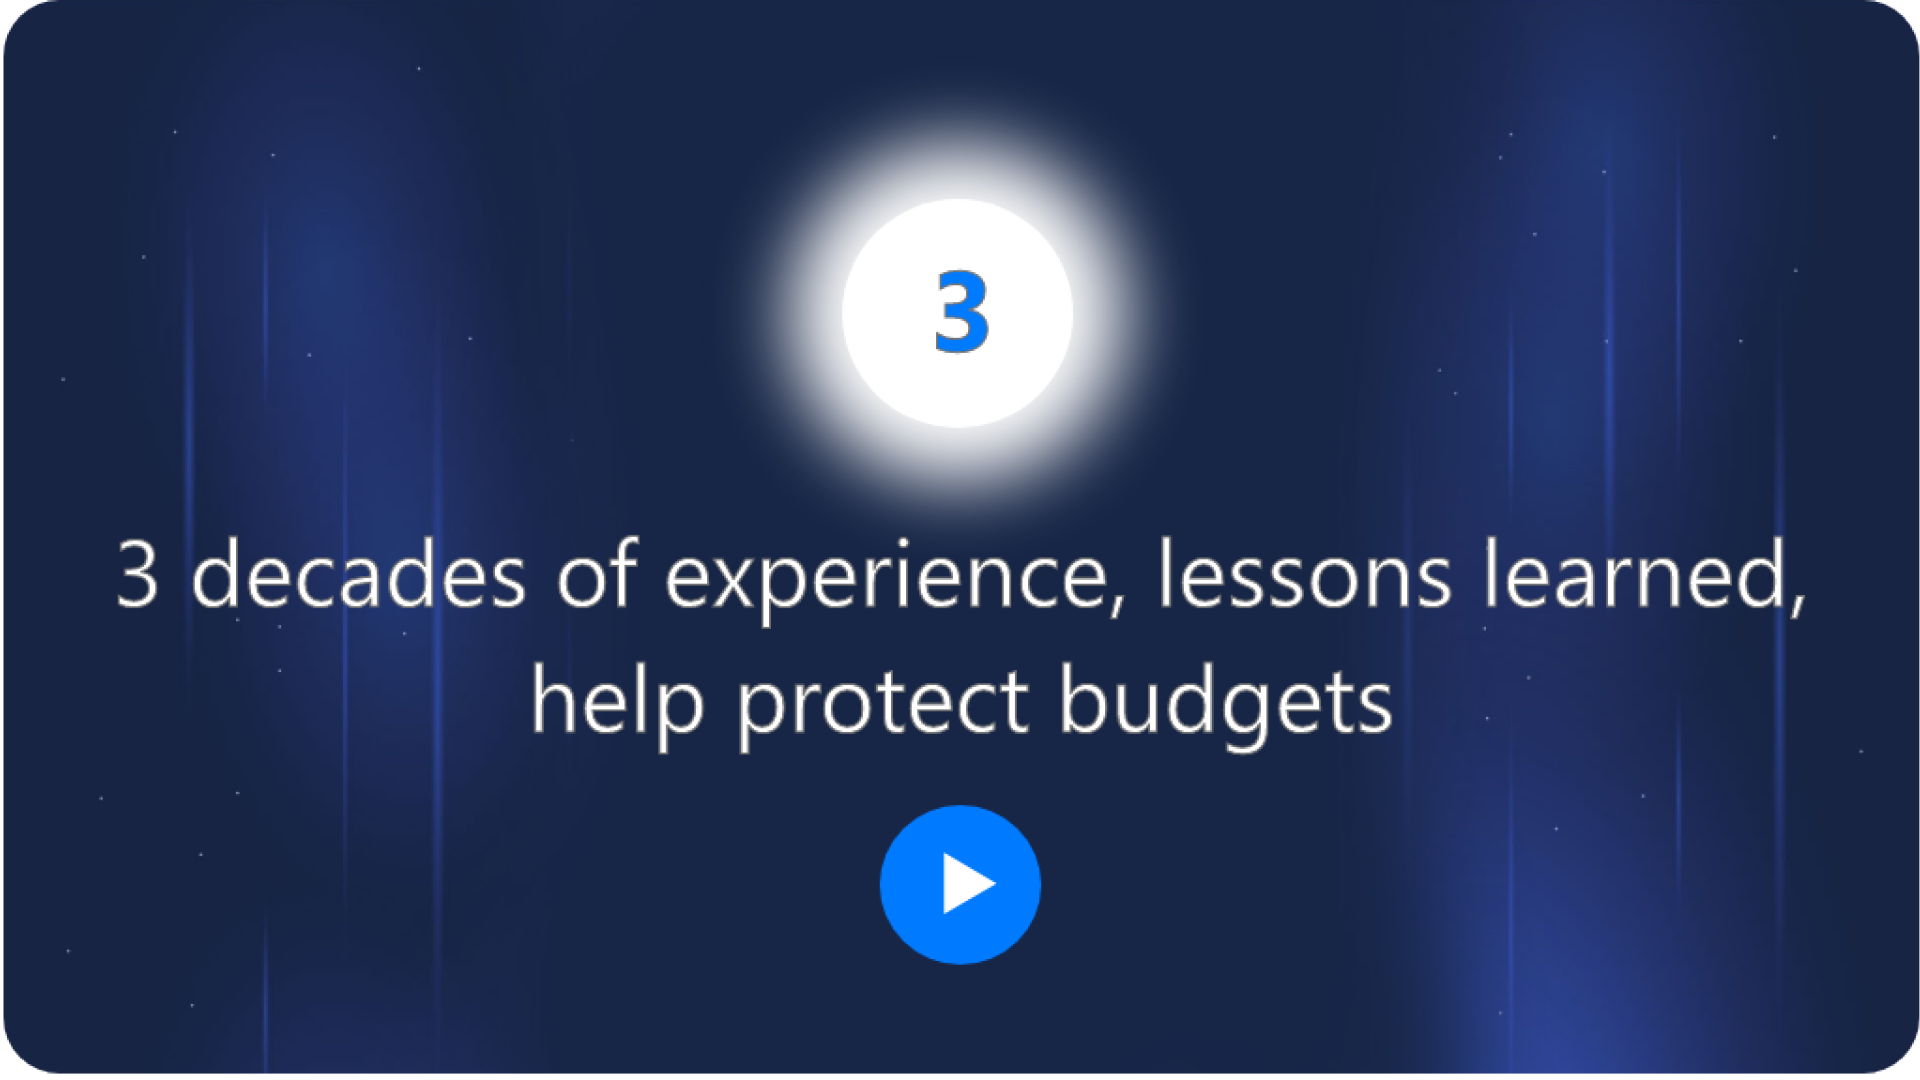 3 decades of experience, lessons learned, help protect budgets